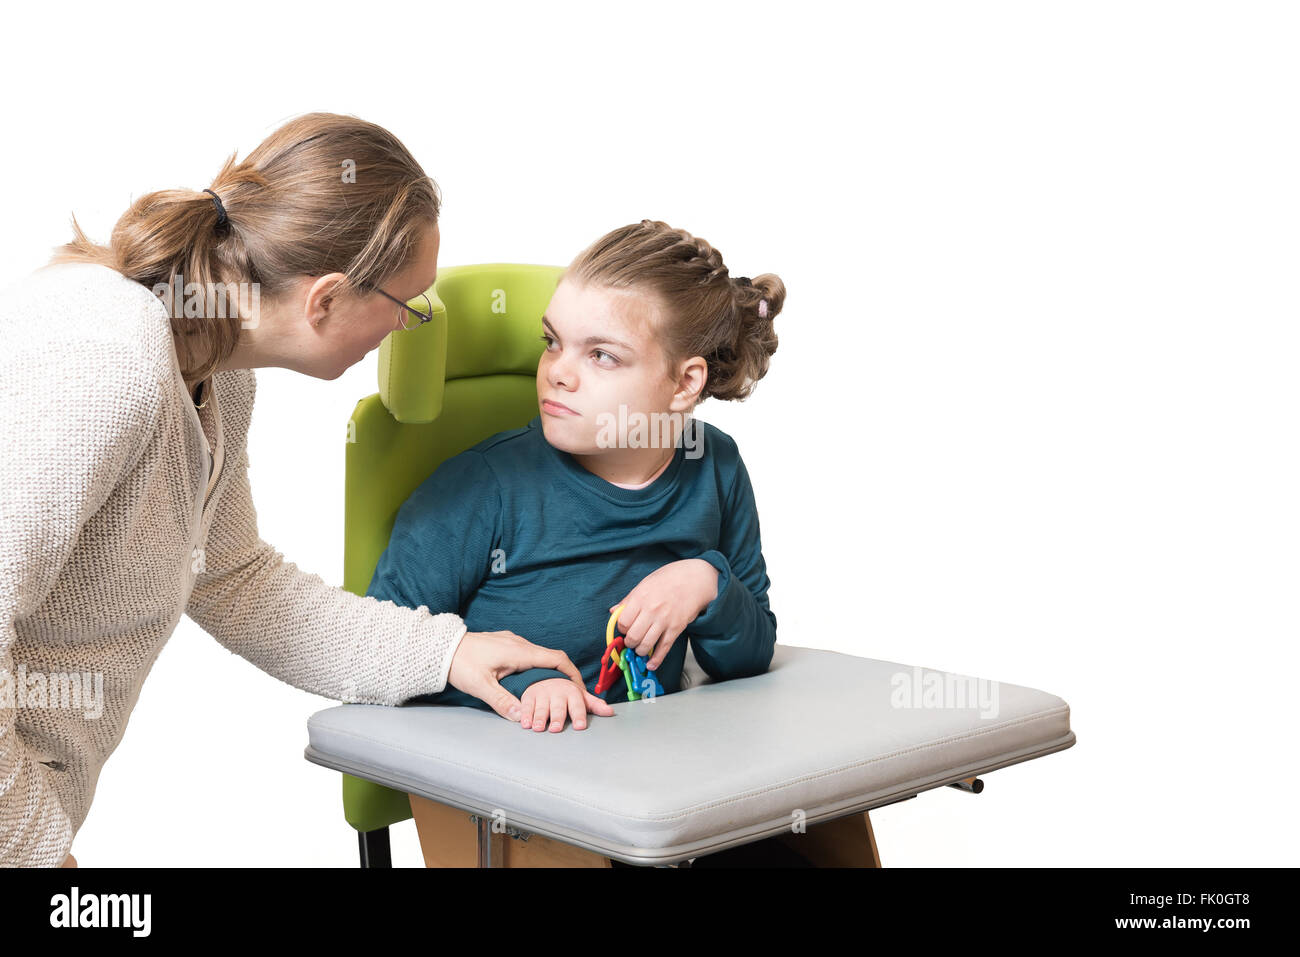 A disabled child in a wheelchair being cared for by a voluntary care worker Stock Photo